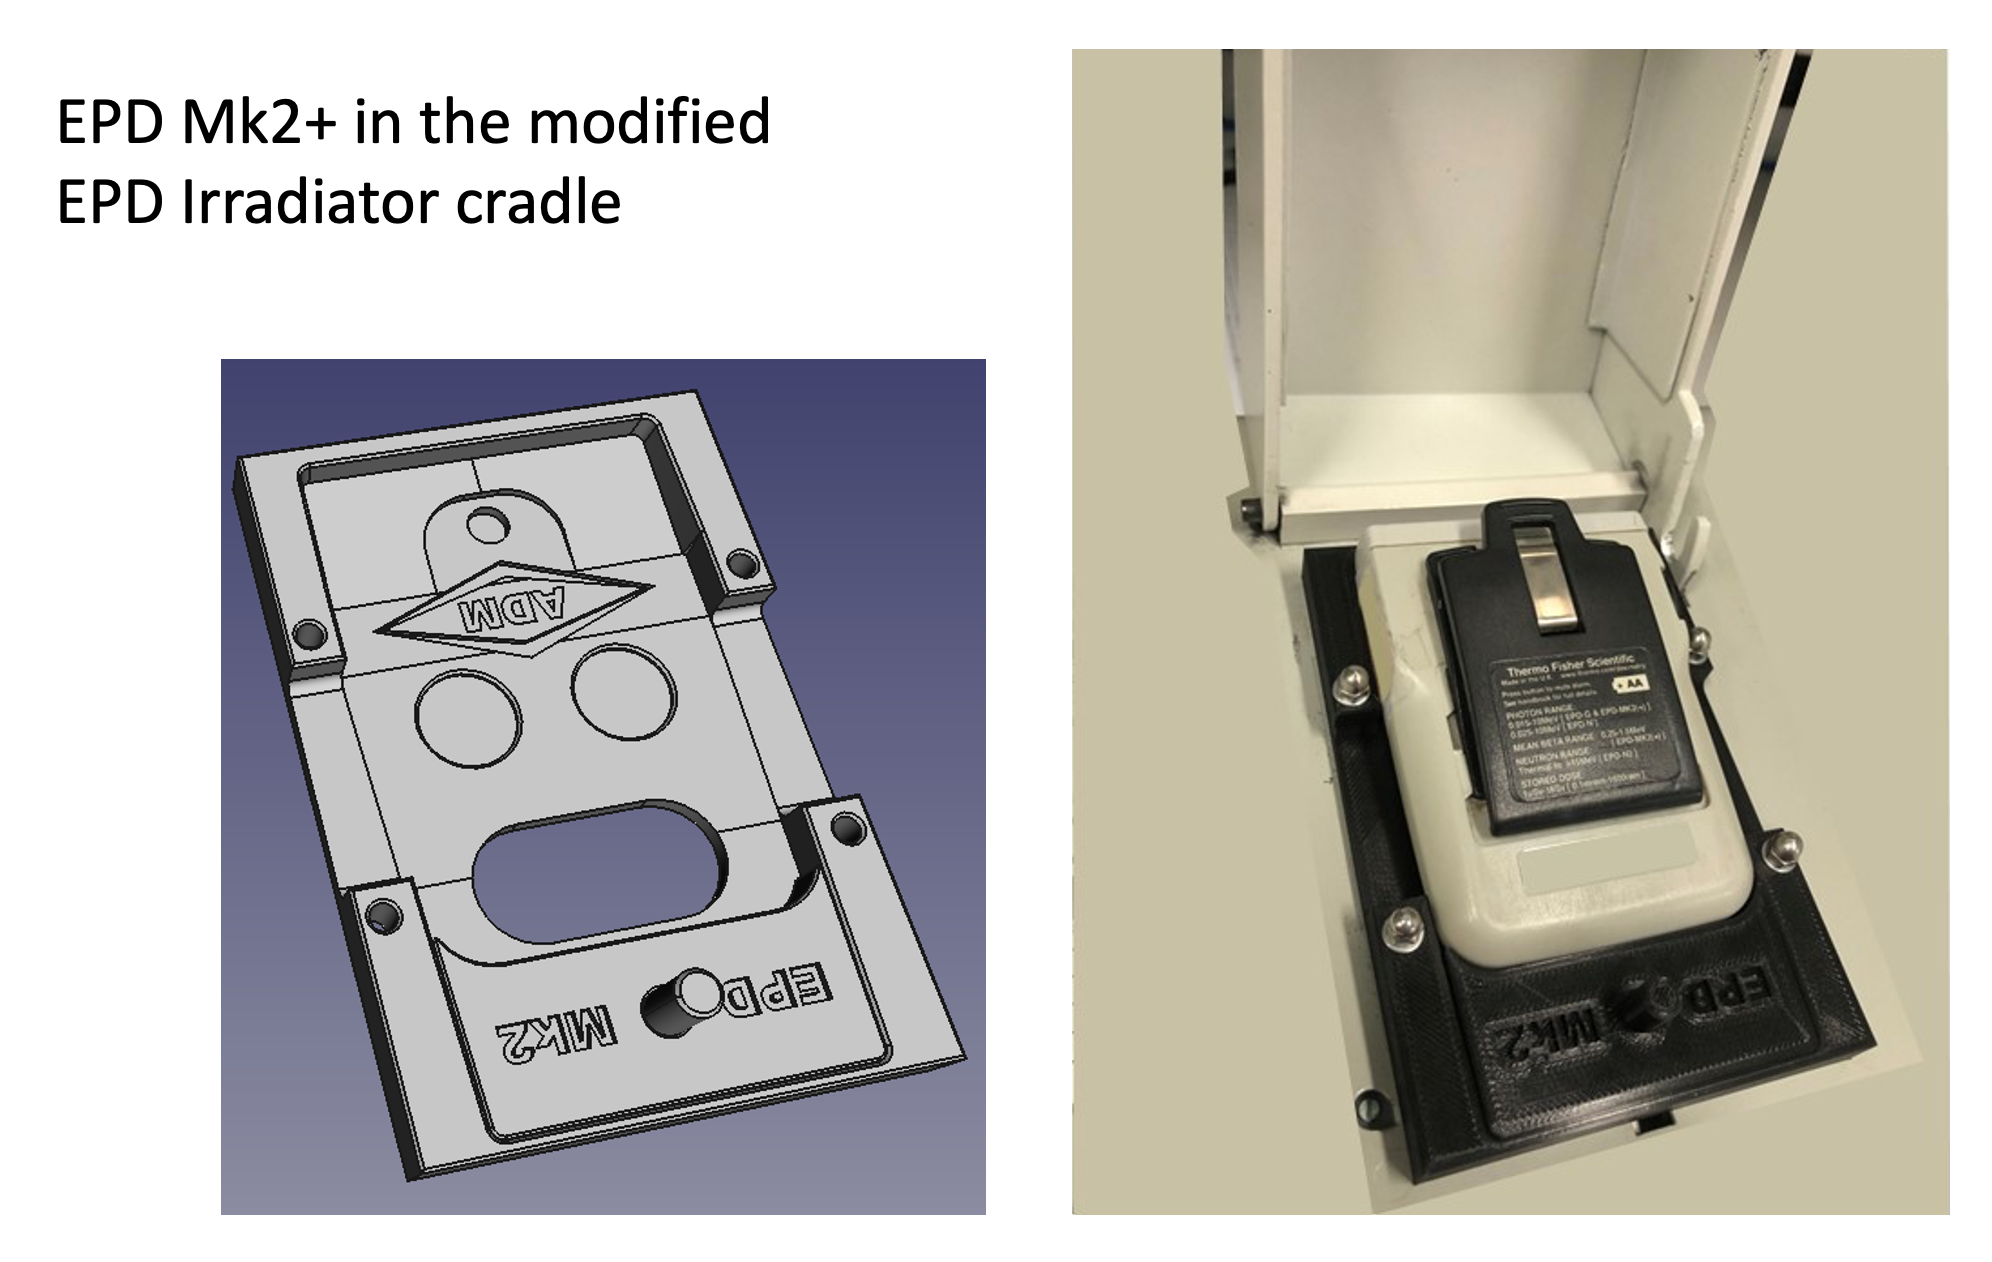 modified irradiator cradle for EPD Mk2 plus